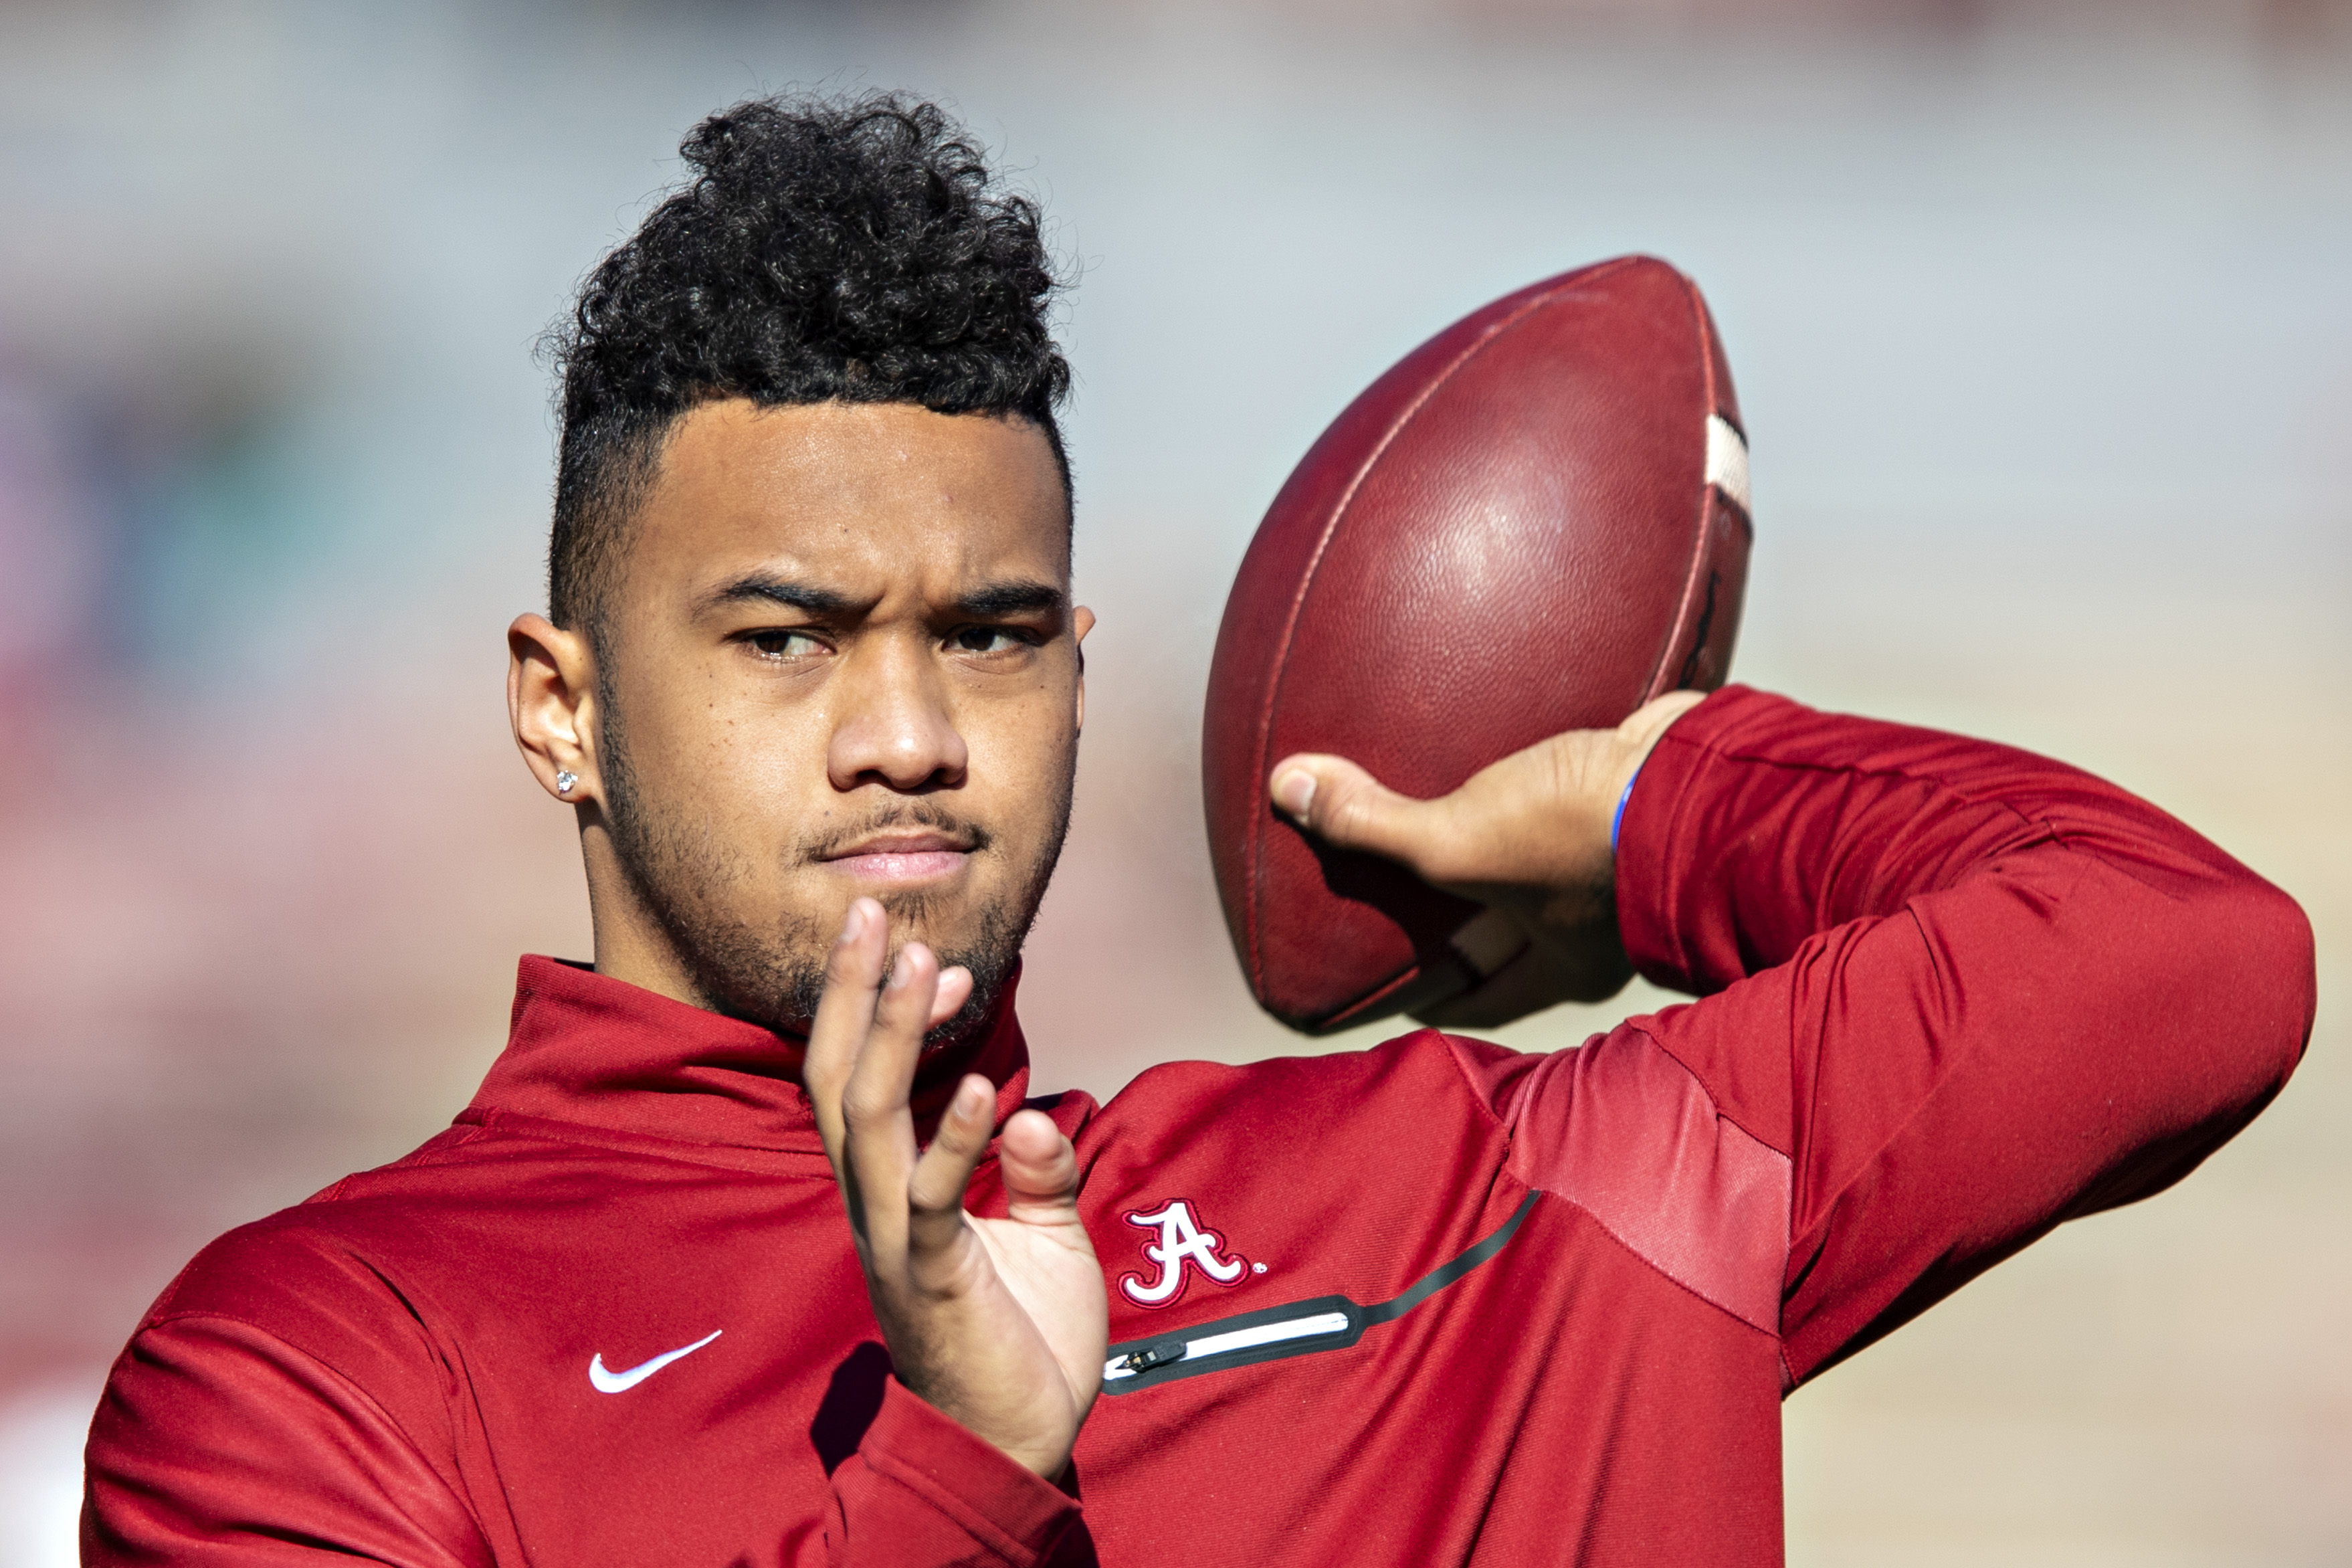 Tua Tagovailoa's Pro Day Workout Video Leaks Online Amid Health